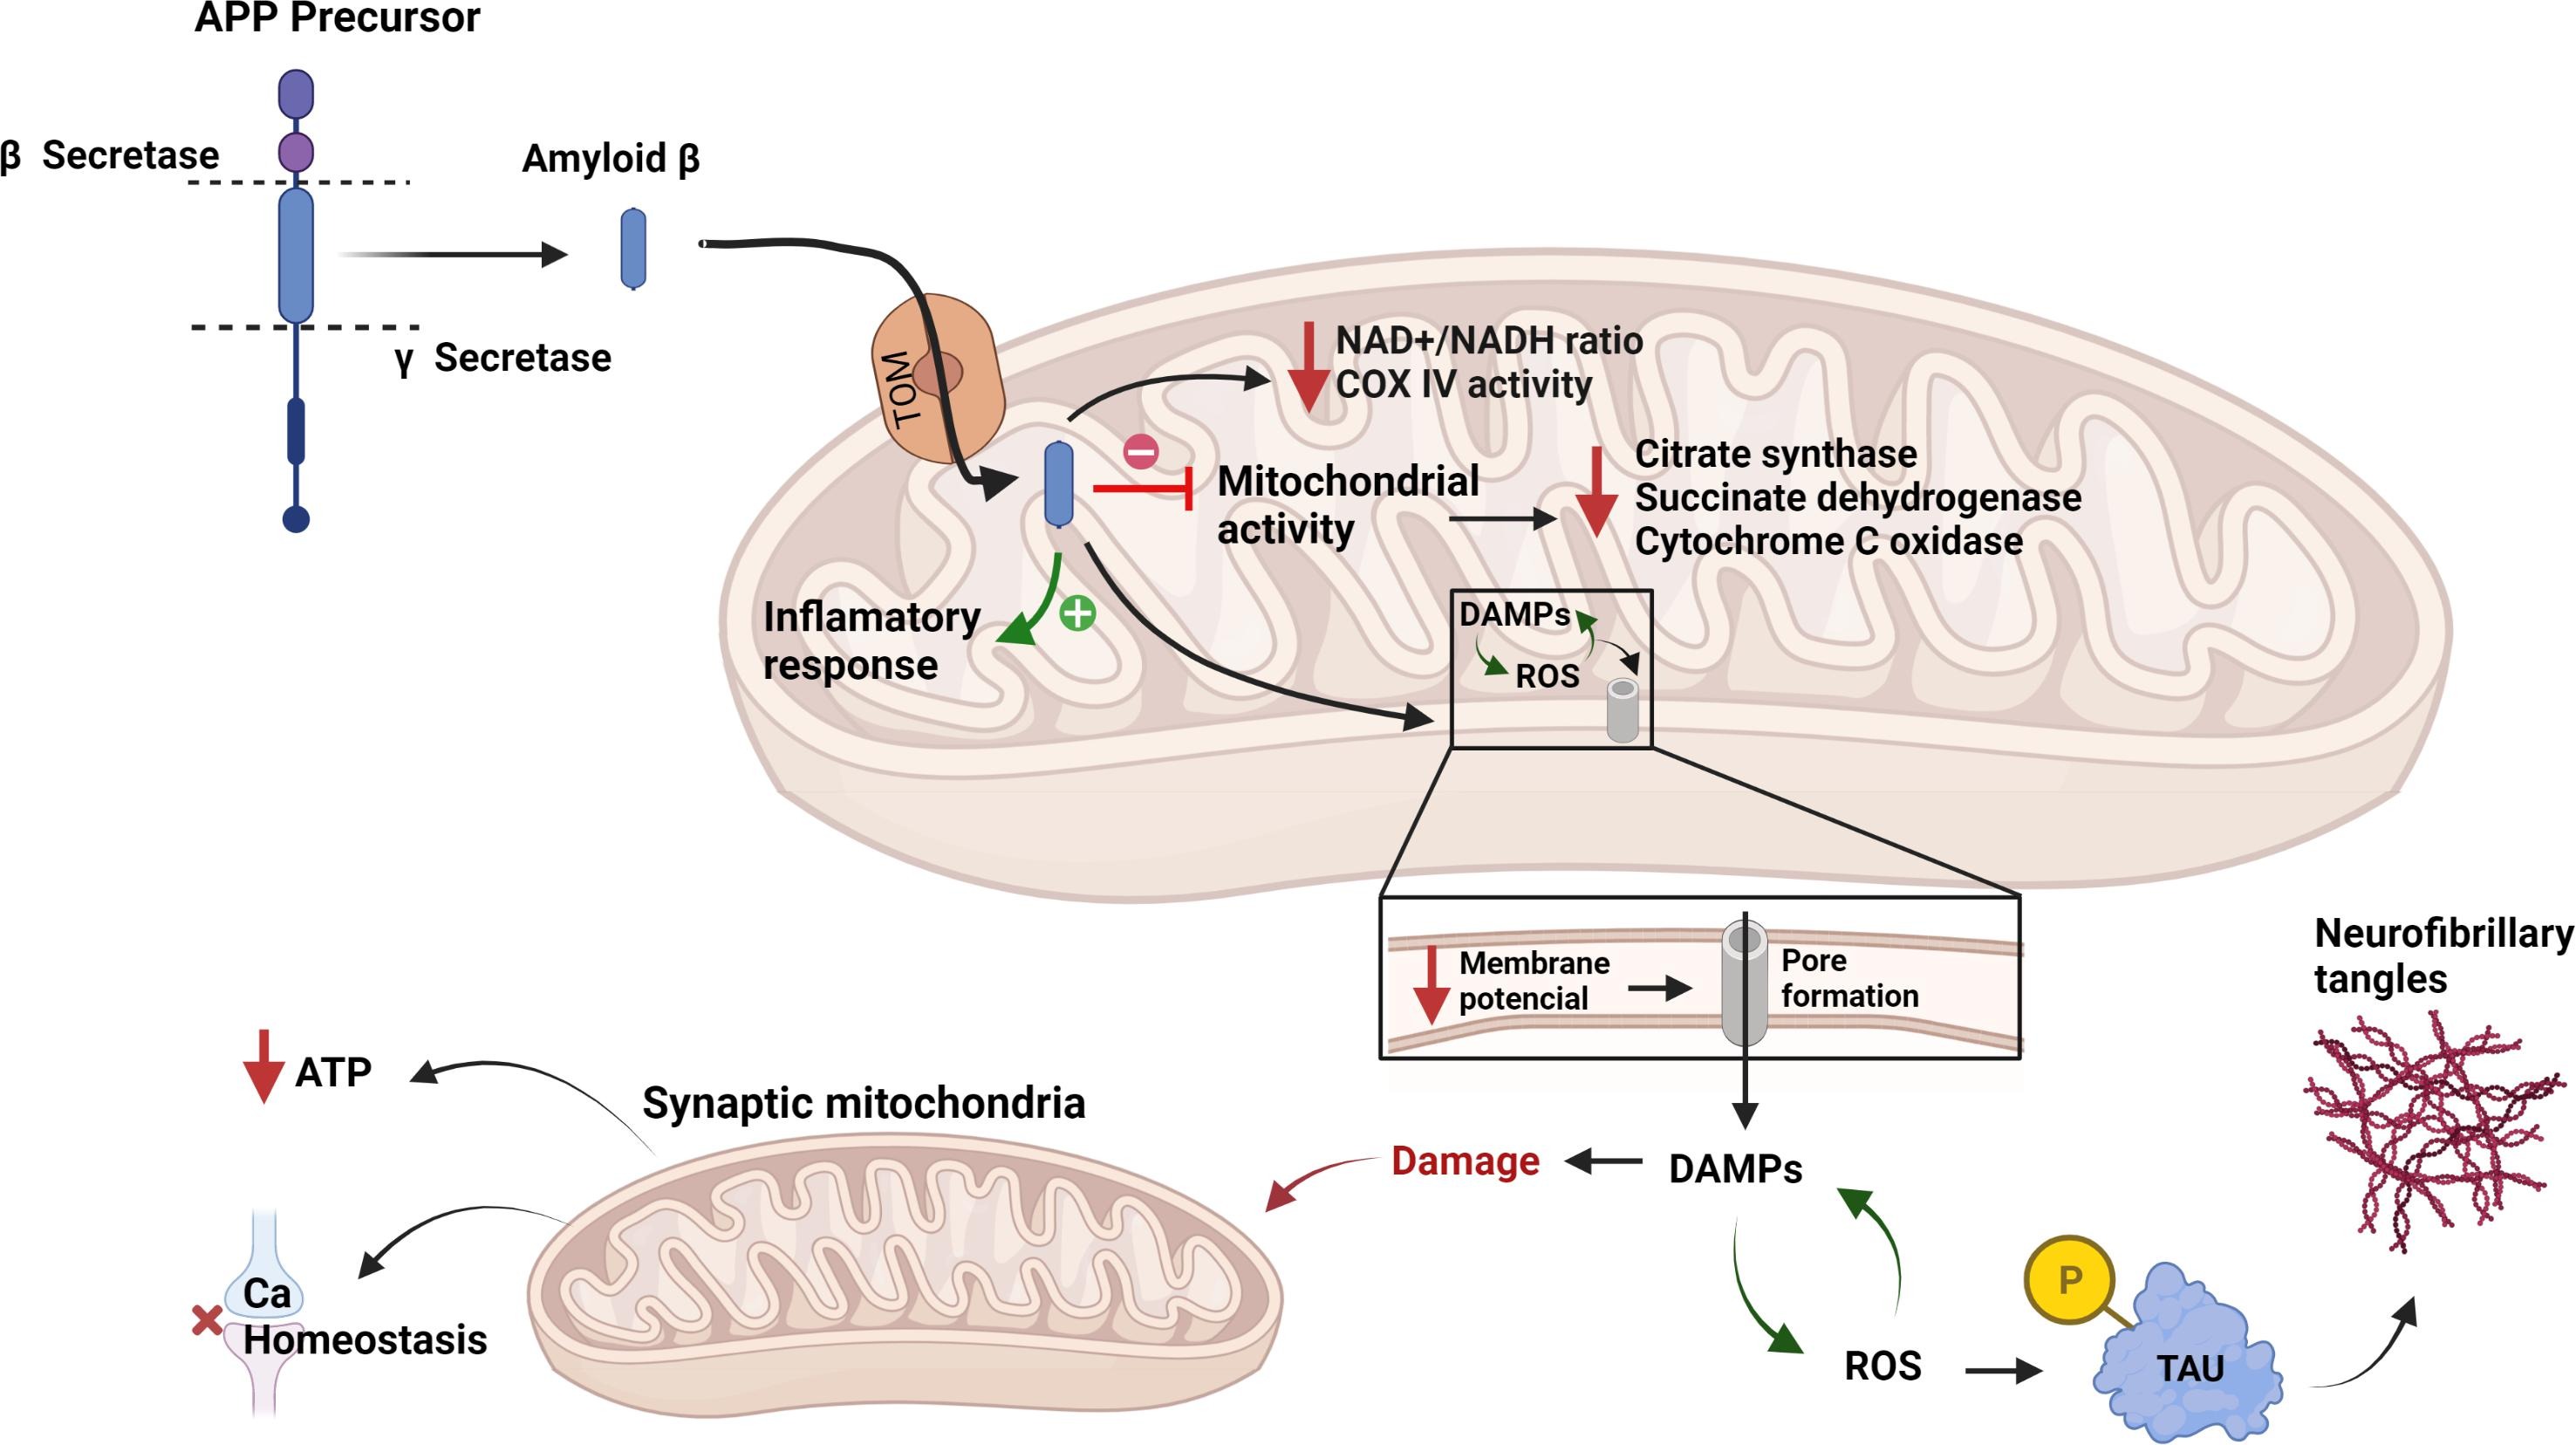 Alzheimer’s Disease, the dark side of the mitochondria.